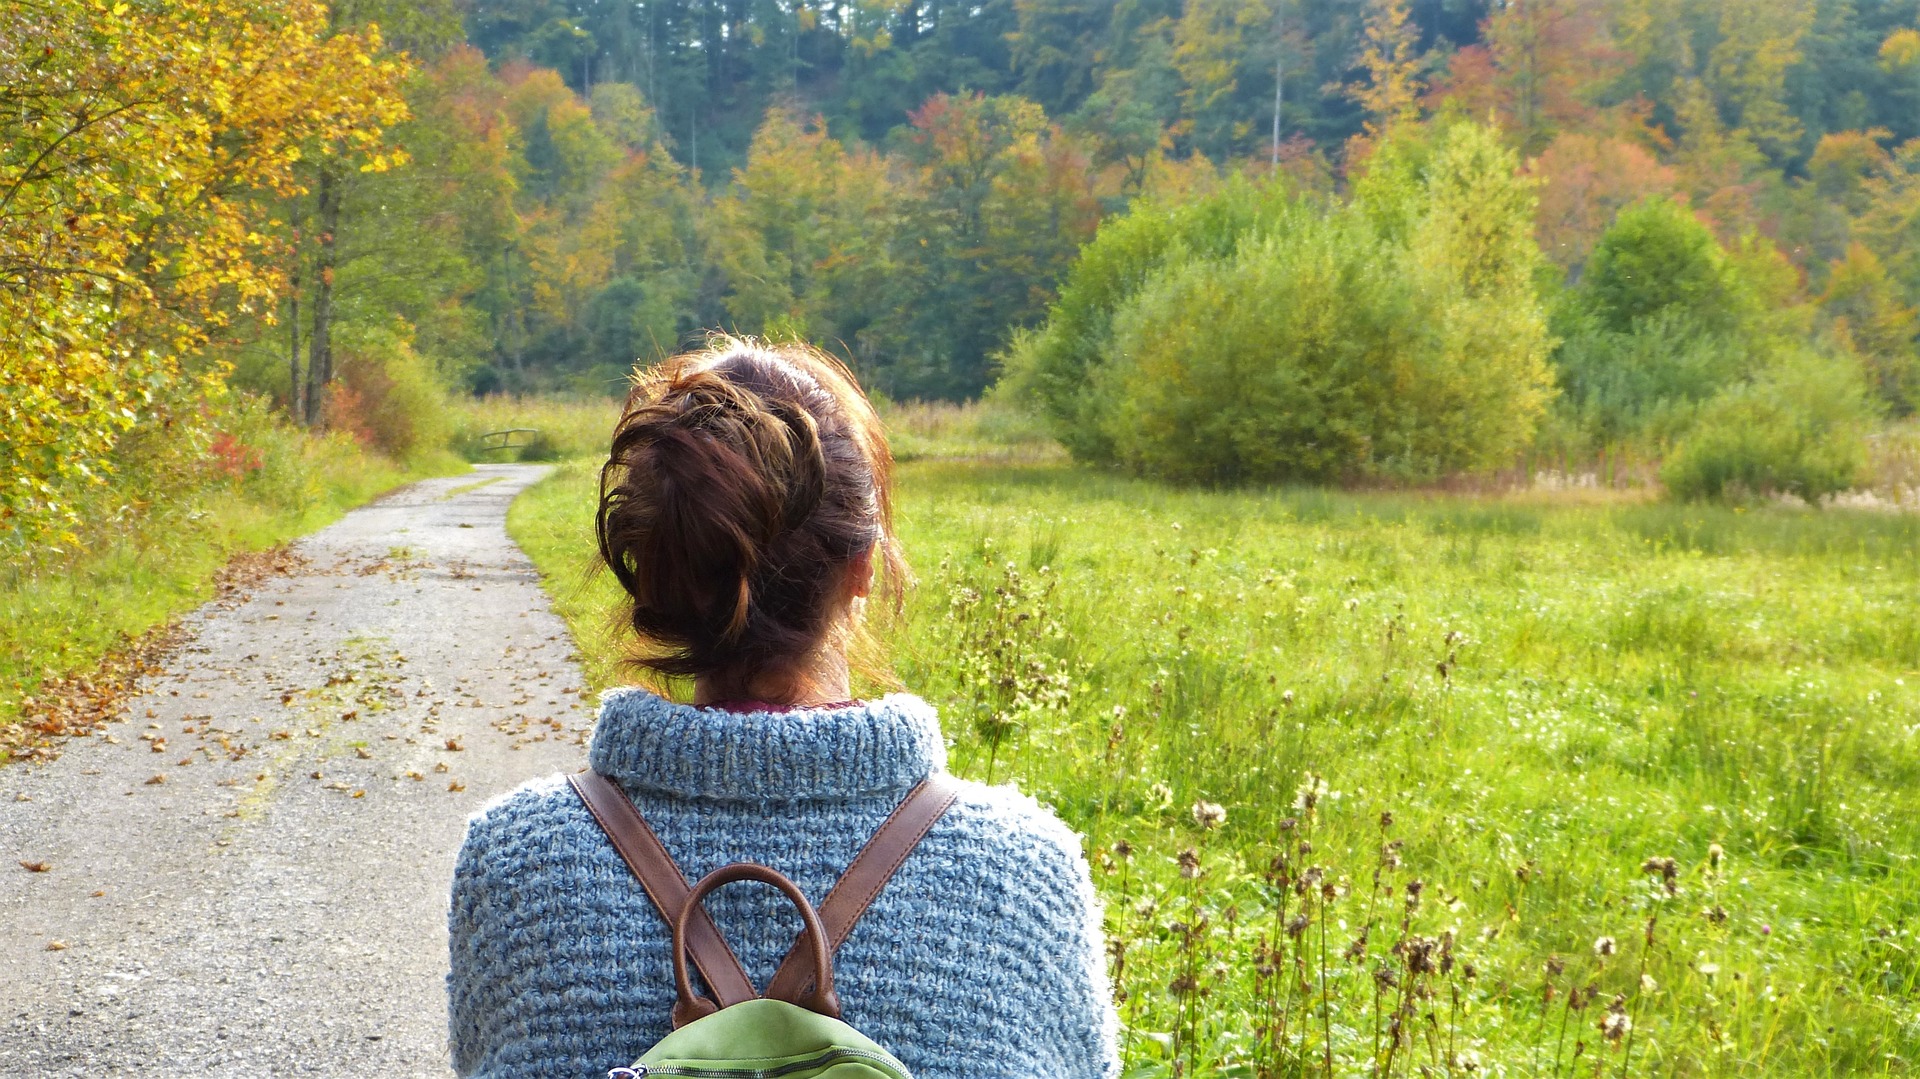 Woman looking at a path in a forest.